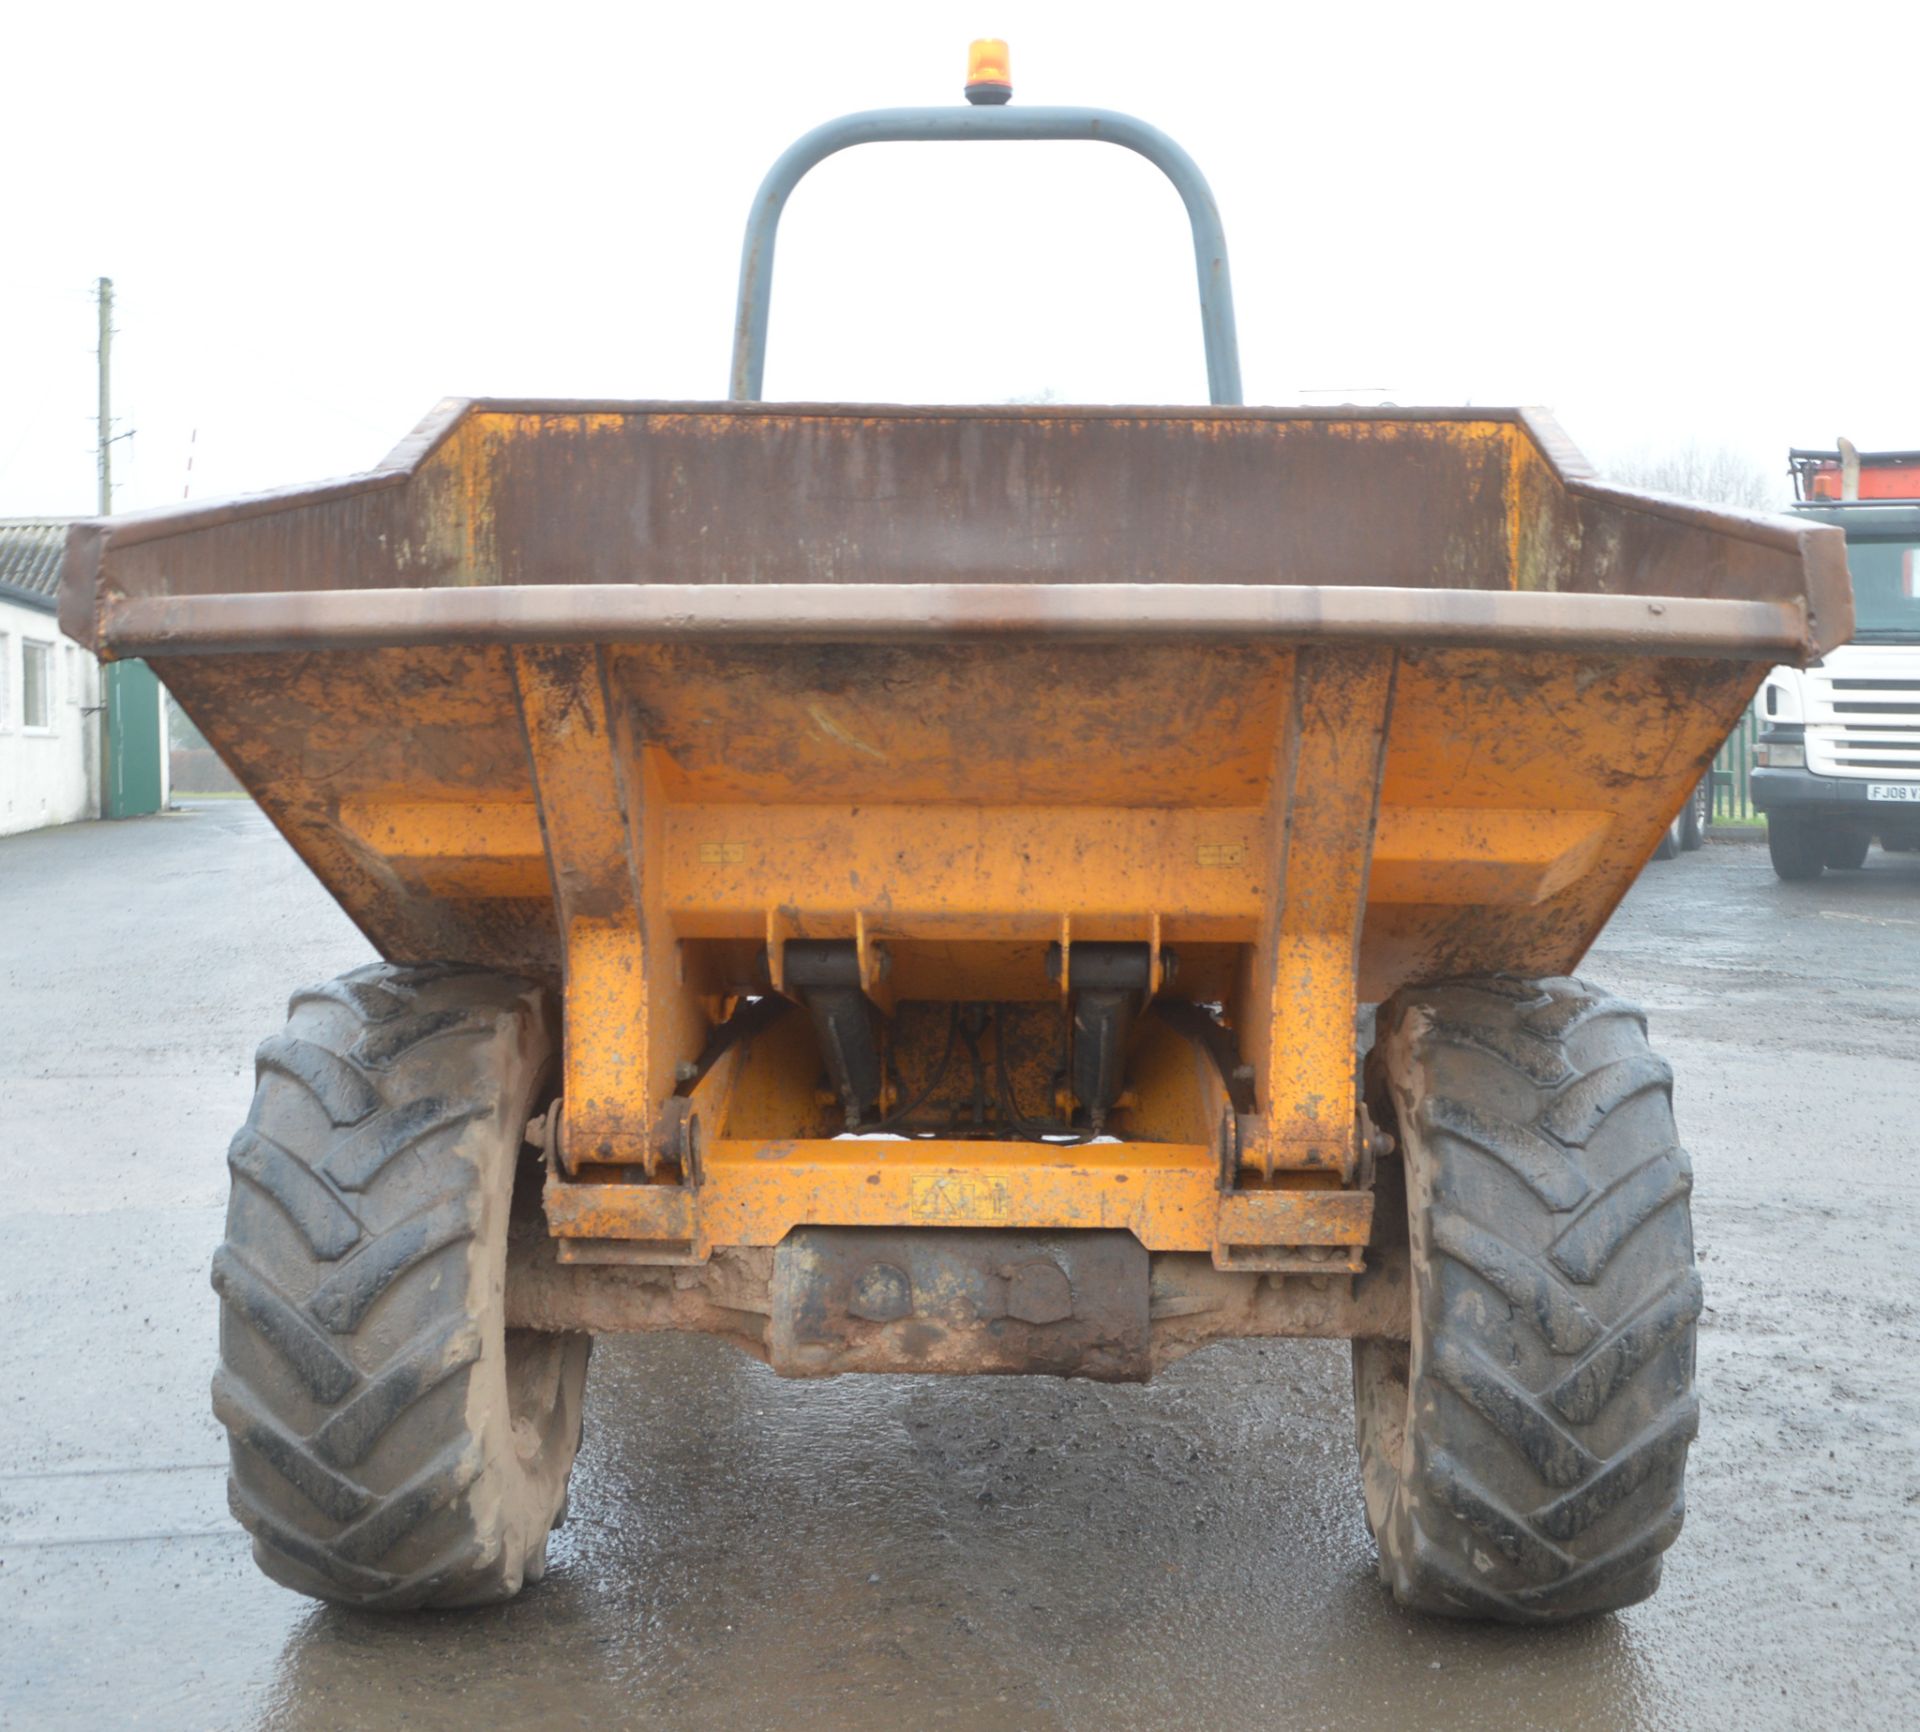 Benford Terex 6 tonne straight skip dumper Year: 2003 S/N: E303EE119 Recorded Hours: Not - Image 5 of 11